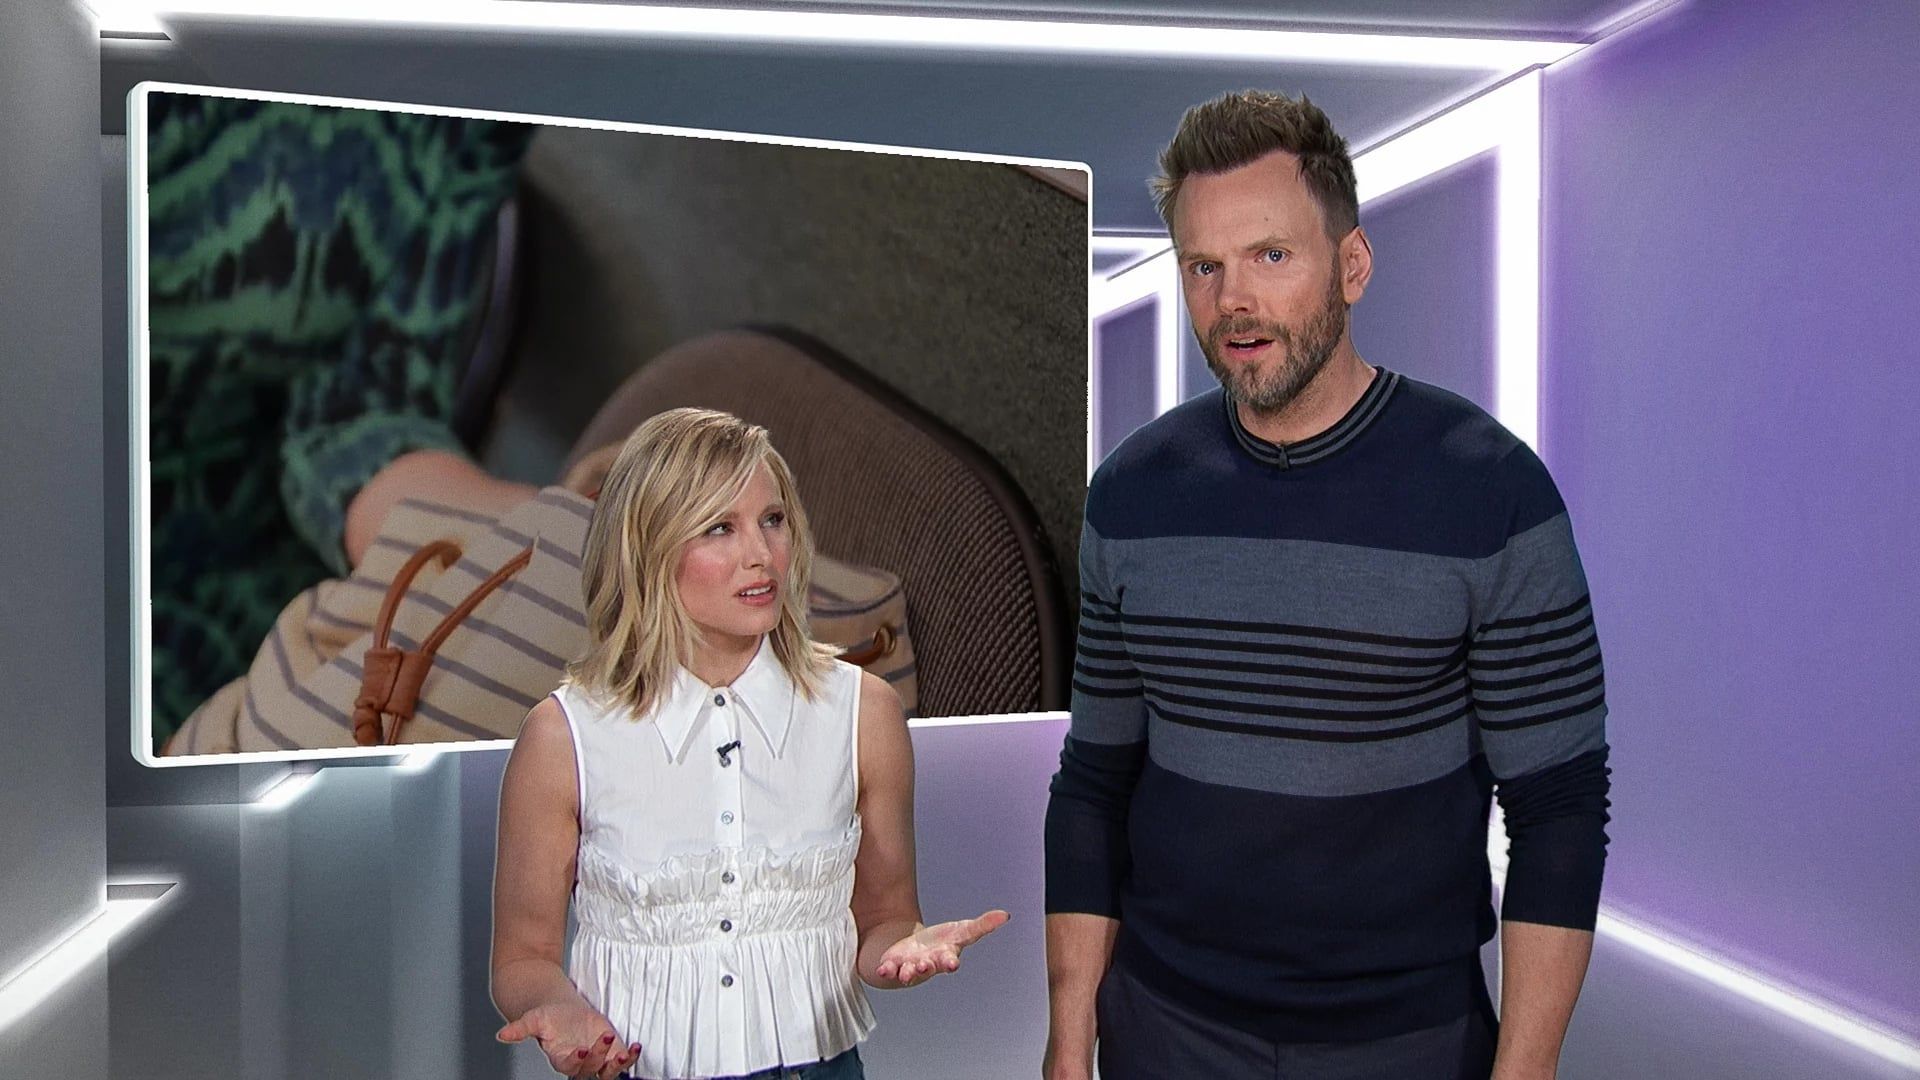 The Joel McHale Show with Joel McHale background